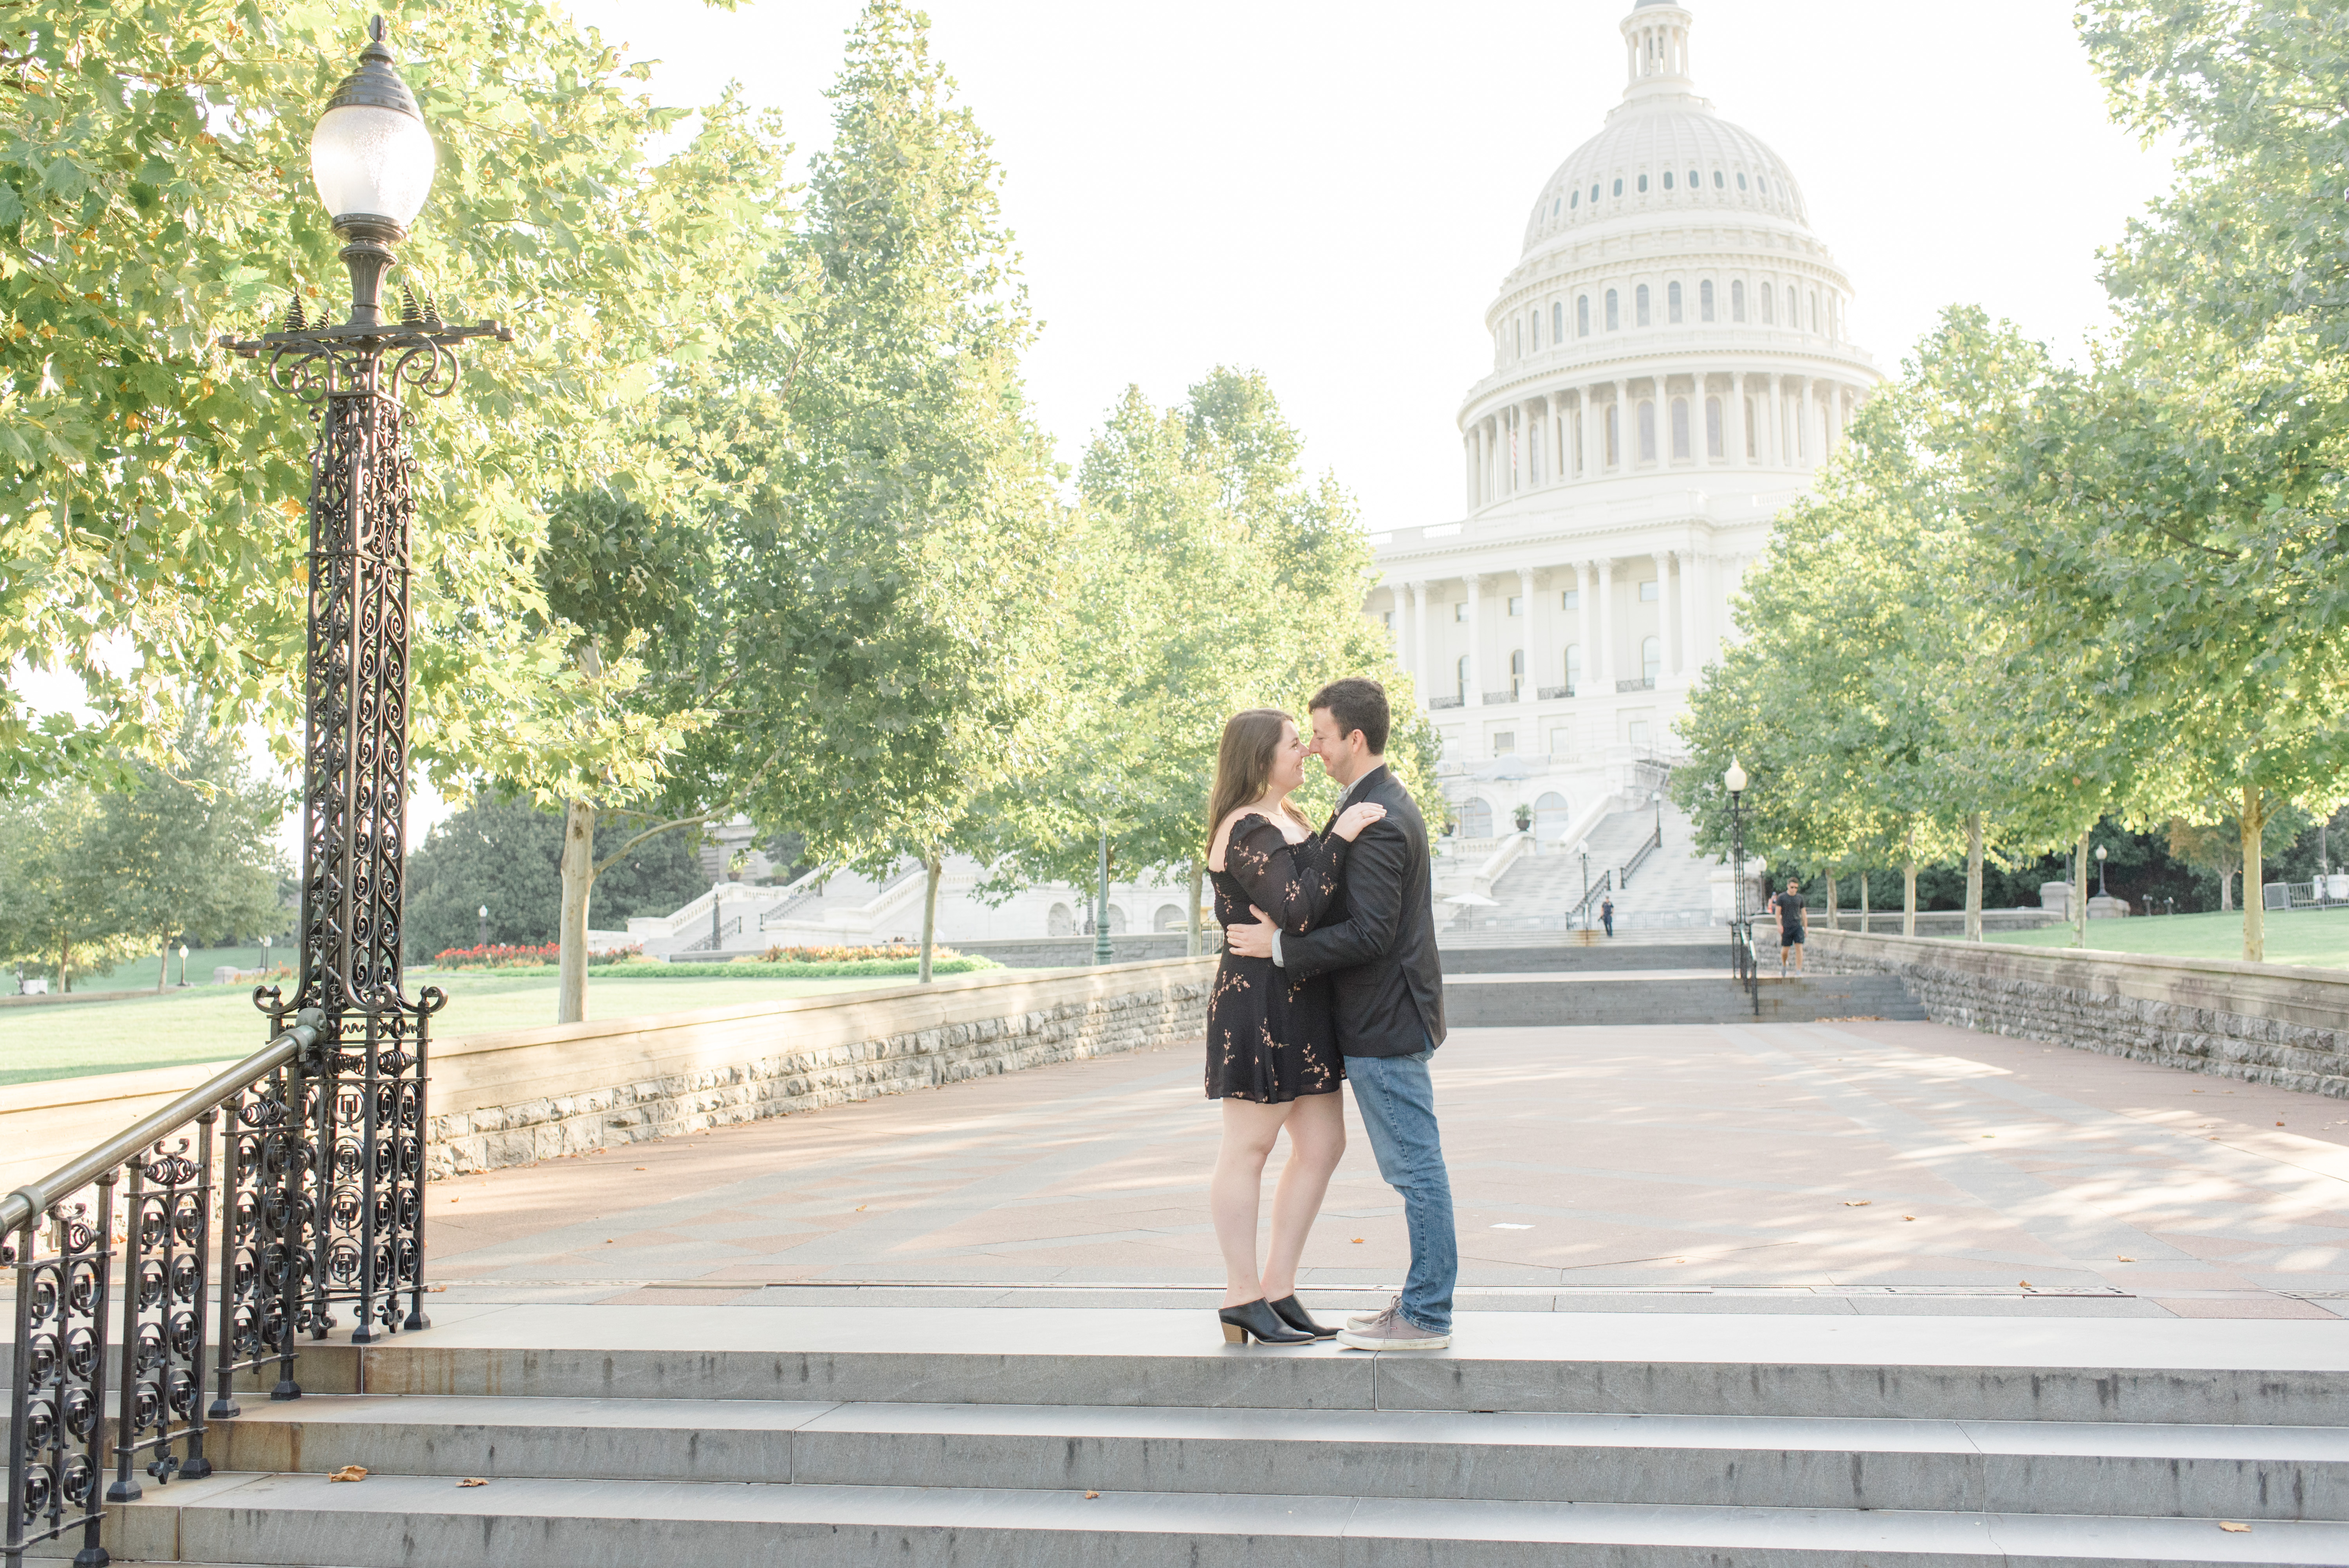 Taking engagement photos at the United States Capitol building in Washington DC.